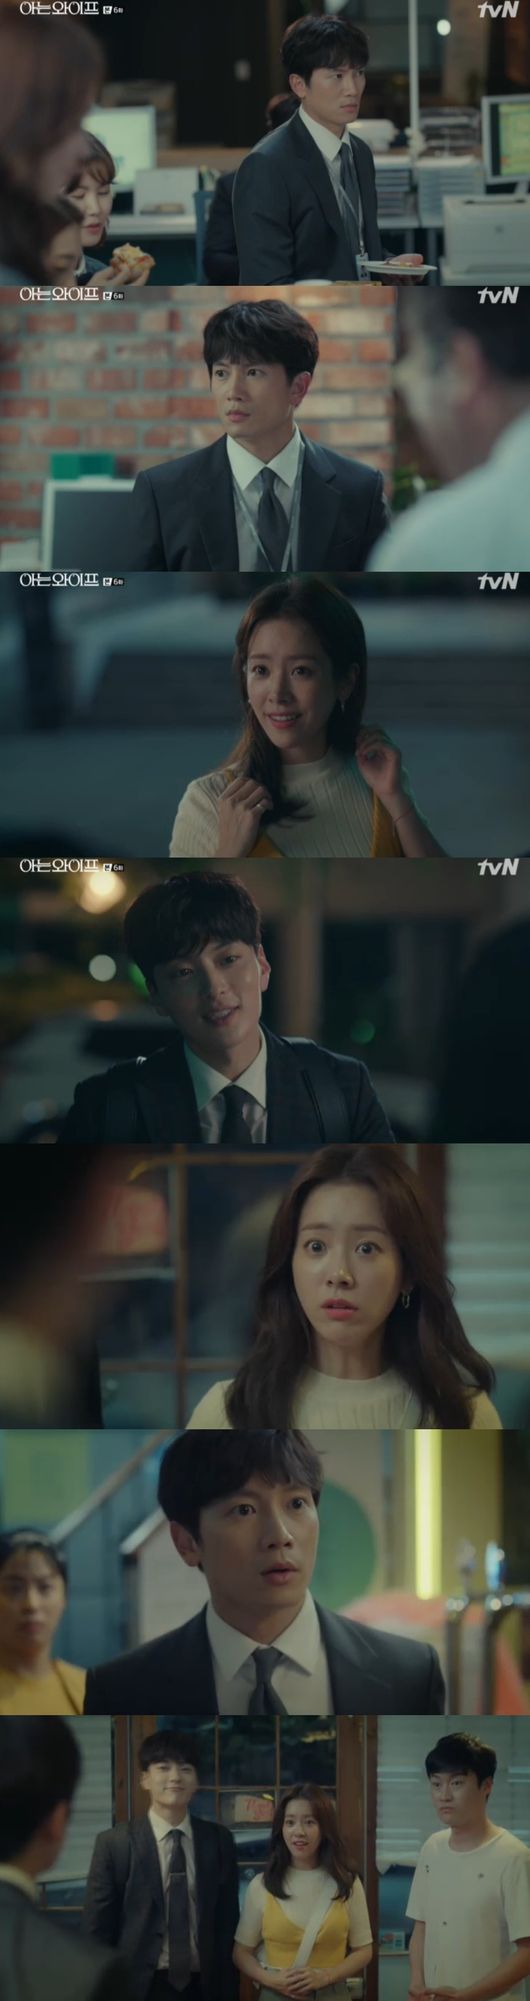 Kang Han-Na witnessed Ji Sung stroke Han Ji-mins head in Knowing Wife.Hye-won (Kang Han-Na) witnessed Ji Sung-mins skinship with Woojin (Han Ji-min) in the TVN drama Ai is a Wife (directed by Lee Sang-yeop, played by Yang Hee-seung) broadcast on the 16th.Hye-won was exercising at the gym and waited for his younger son. He finally appeared and said, Did you wait for me? Hye-won maintained his poker face, saying, No.After finishing the exercise, he followed him and said, Lets go with my sister. He was hungry and actively came out, asking for food.Hyewon said, You do not think you are anything. He confessed, Let me do something, my sister is good.Hyewon said, Are you really going out? And asked him to abandon his fantasies about his association. He said, I saw the ring before. Hyewon said, You should know, meet your age instead of wasting time.I do not know if it is my way, I have not done proper love, said Young-nam. I will do my best to put up with it.Hye-won only looked at the back of such a young man. He looked at Hye-won as he approached again, and Hye-won was a snow.It turned out that the younger brother and son had deliberately approached Hyewon by imitating the second generation of chaebol.World Bank told him about leadership education, saying that Ju-hyeok had to go, on condition that he should coach Woojin properly.I have to go to leadership education, and I said that Juhyuk has an important commitment.After the war, he drove with Woojin to the training center. He showed a thorough appearance by preparing lunch boxes.Woojin said, I have done a lot of love. After the end, I was embarrassed that I had no experience. At the school, the end met with the women I had met.Woojin noticed this, and the latter was embarrassed. He was busy explaining it.Woojin smiled and said, What are you explaining so hard, its all over the past, he said. Its cute, its more humiliating not to have a love affair at that age.Joo Hyuk went to the common sense.I called the end of the day, but I did not answer the phone, and the common sense said, It seems to be doing a great job. Suwon FC, where love blooms.Juhyuk imagined the two and headed for Suwon FC in the taxi at that time.After the ceremony, he ignored Juhyeok and drank Woojin and wine. Juhyuk was worried about Woojin, which was weak.After the end, he asked Woojins movie taste. Joo Hyuk predicted I wonder, melodrama, but Woojin replied differently, Its a comedy.When I want to cry, I cry with melodies when I have no excuse. I do not want to show weakness, so I have a strong pride.Joo Hyuk recalled Woojin, who was tearful while watching a melodrama in the house, and then I was sorry to know why.The next day, the two met in front of World Bank, greeting each other casually. Woojin avoided Juhyeok, saying, I have something to live in a convenience store.He refused to do it if he tried to help him. But he was open to help.Ju-hyeok became late at night, and to Woojin, who was leaving late, Ju-hyeok said, Thank you, go carefully, and Woojin felt like a familiar voice.I have something to check, he said to Juhyuk, I am really sorry, and stroked his head with Juhyuks hand.Hye-won, who came to Ju-hyuk, witnessed two people and called them honey.